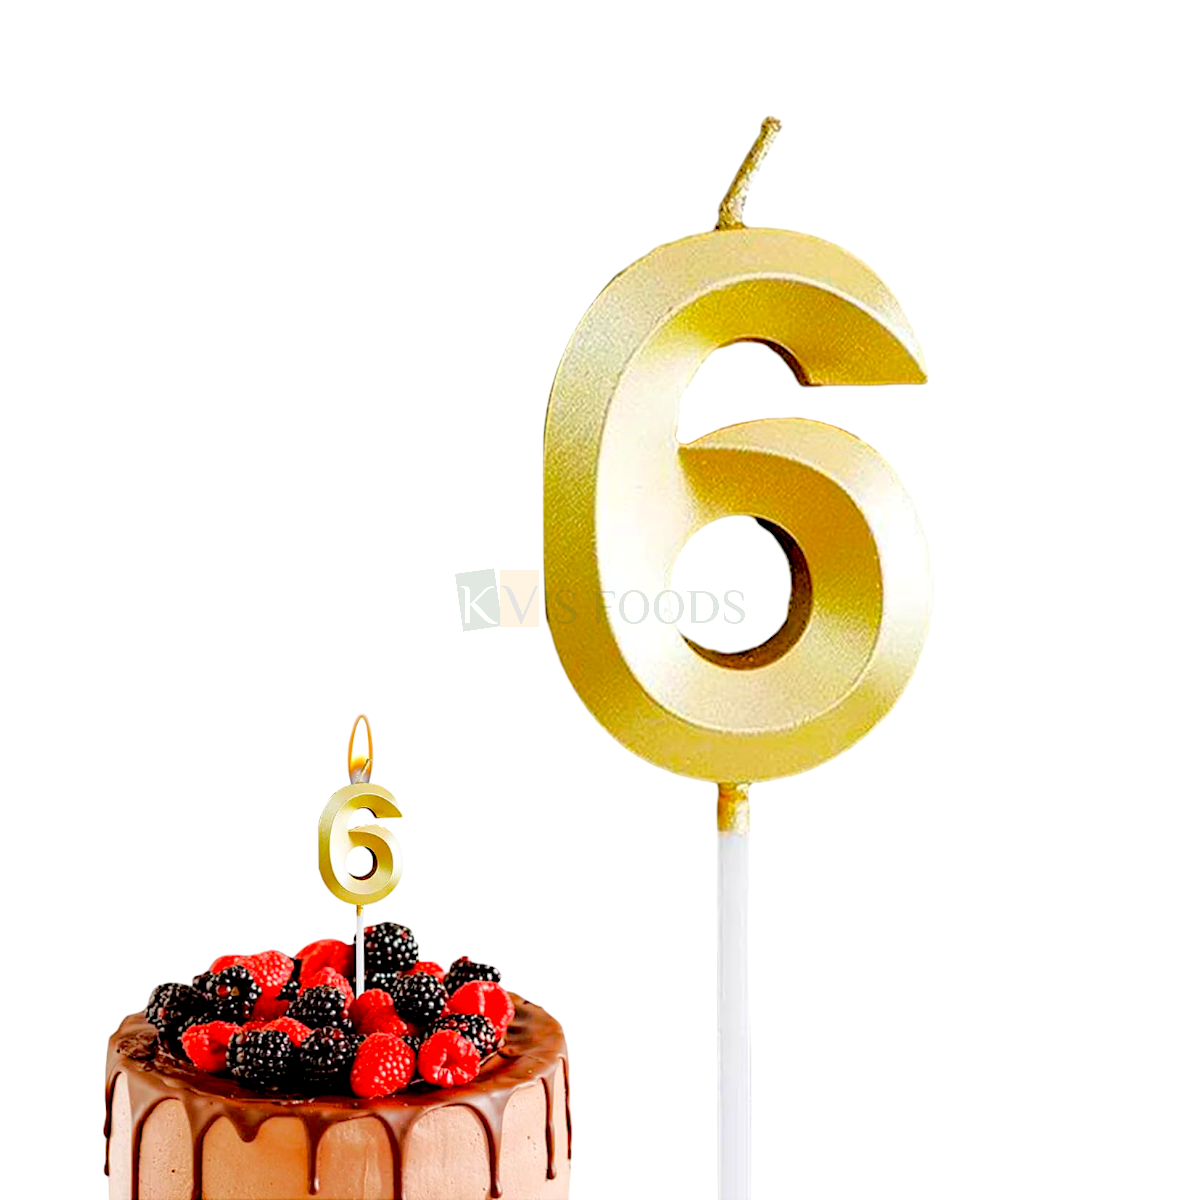 1PC Metallic Golden Colour Shiny 6 Number Wax Candle Cake Topper, Birthday Candles, 6th Birthday Candle Cake Topper, Six Number Theme Cake Insert 6 Years Old Birthday Party DIY Cupcake Decorations